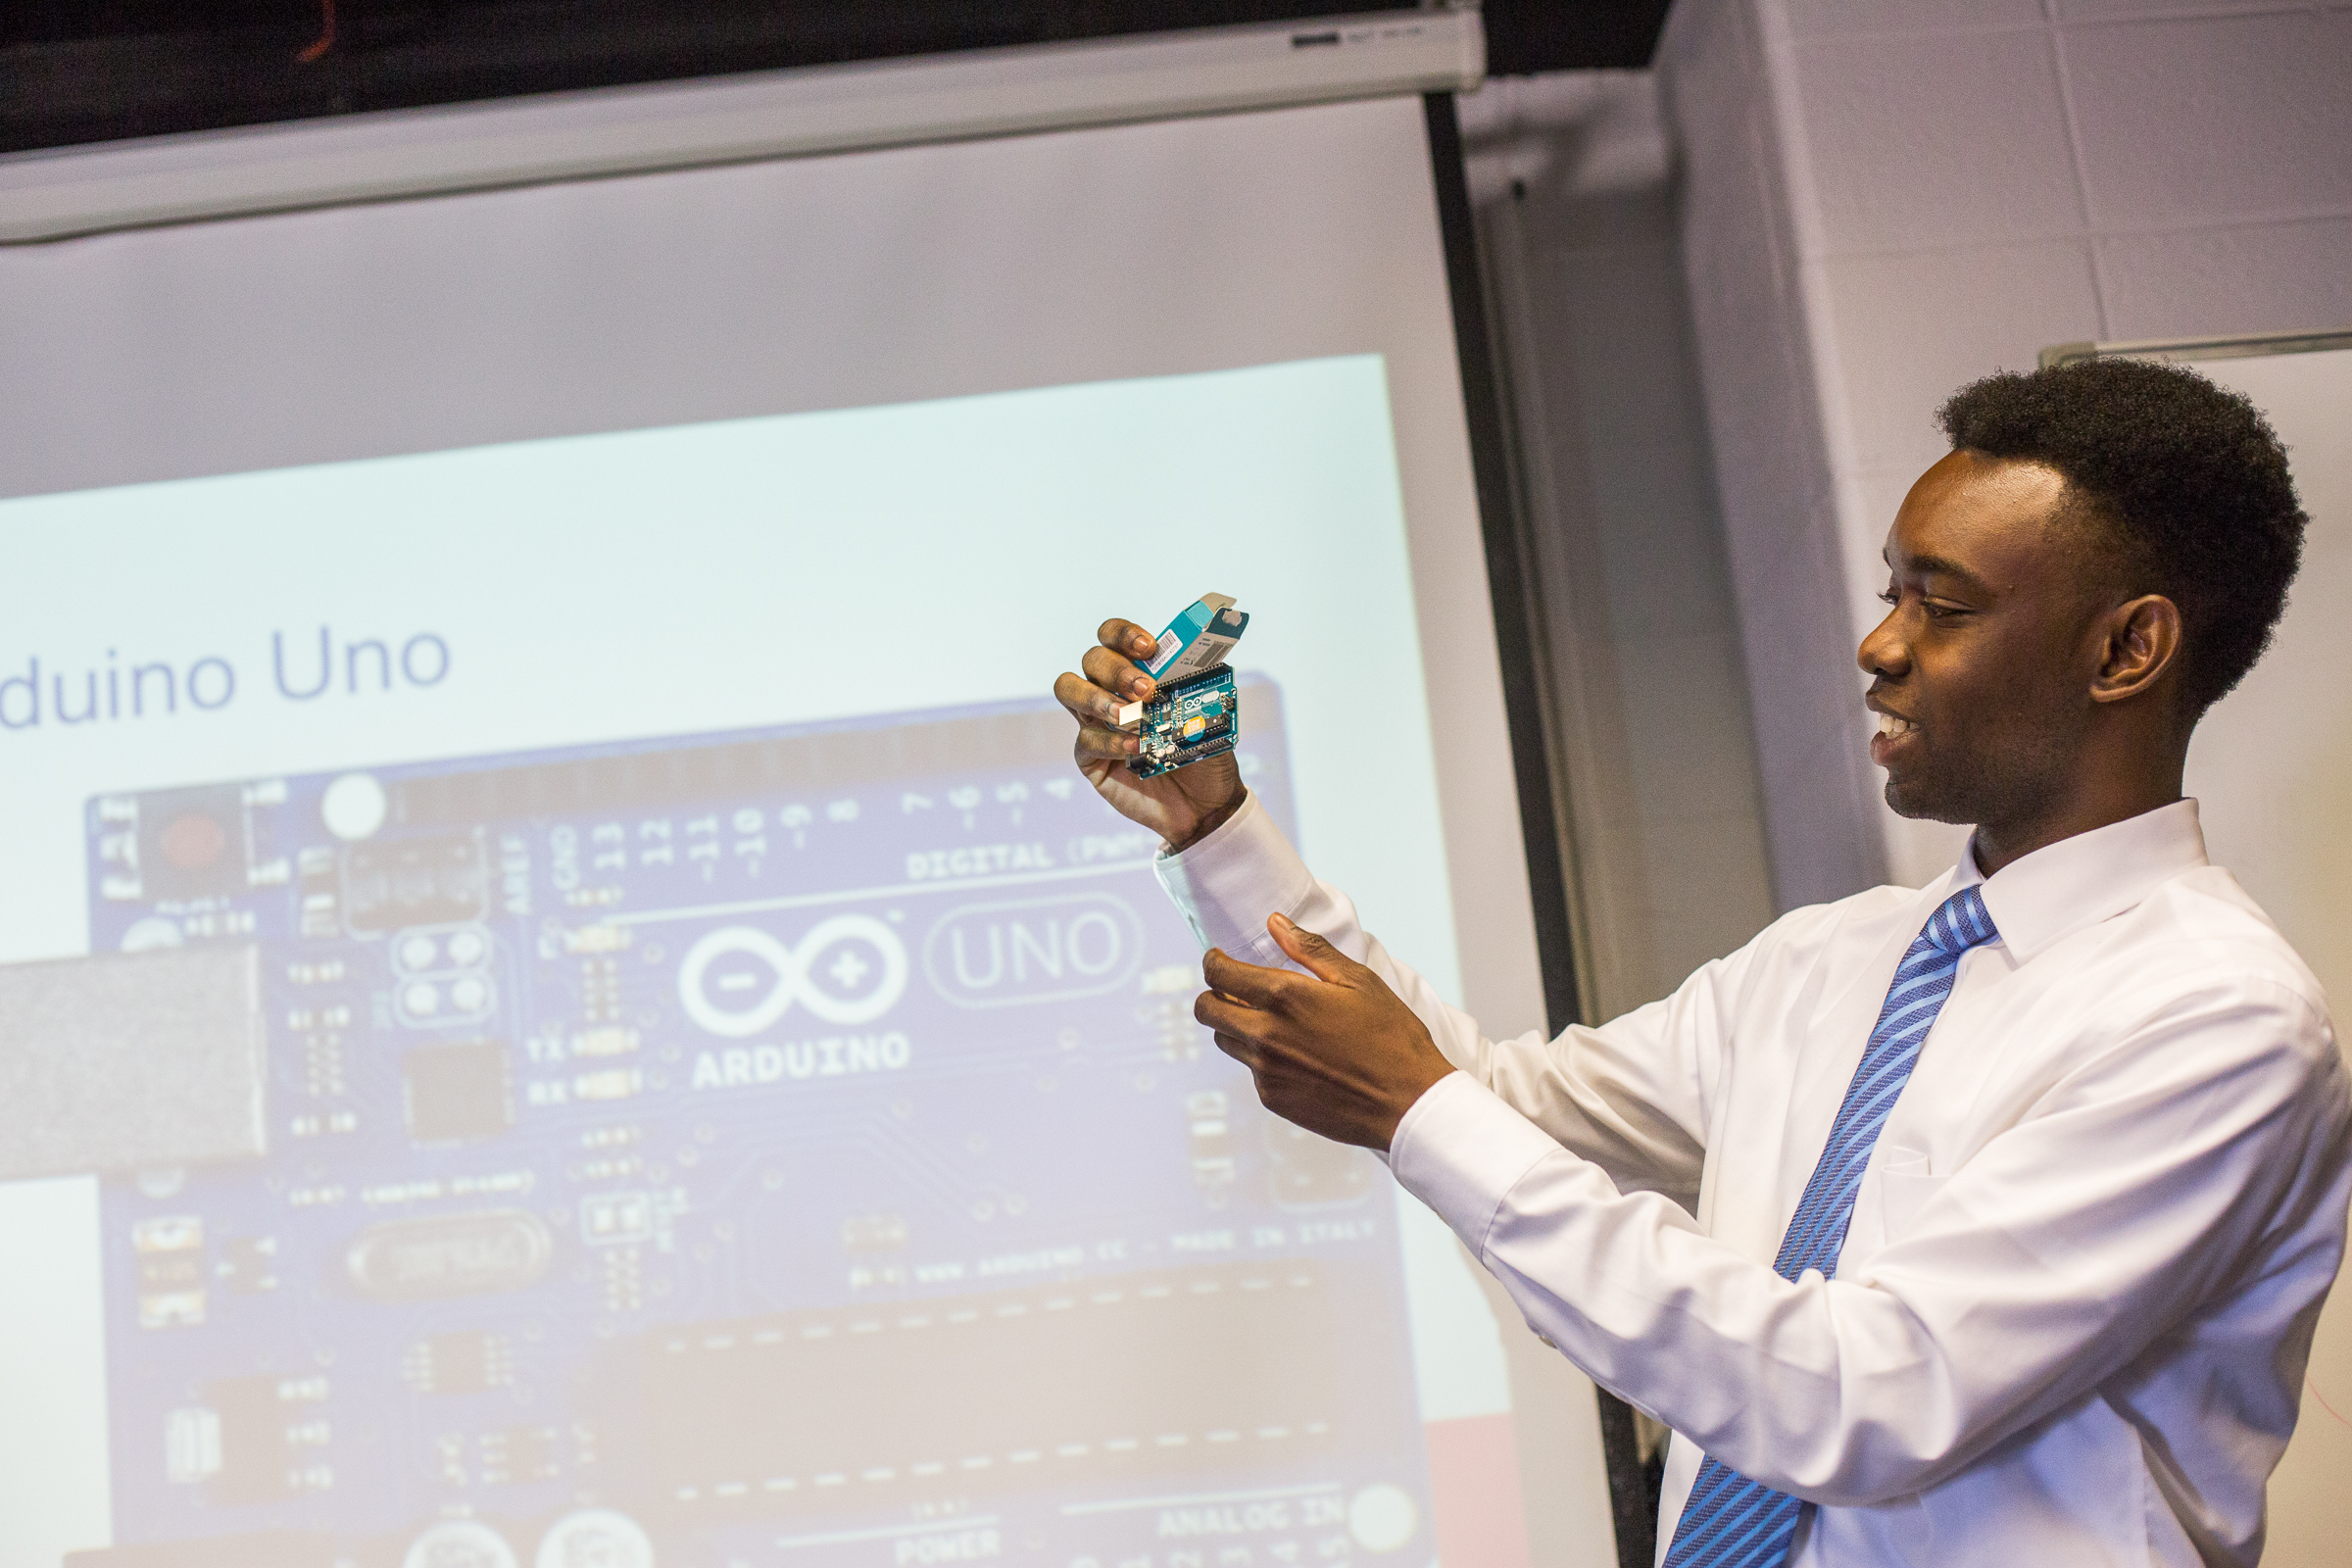 An E.N.G. student holds up an arduino used in his research